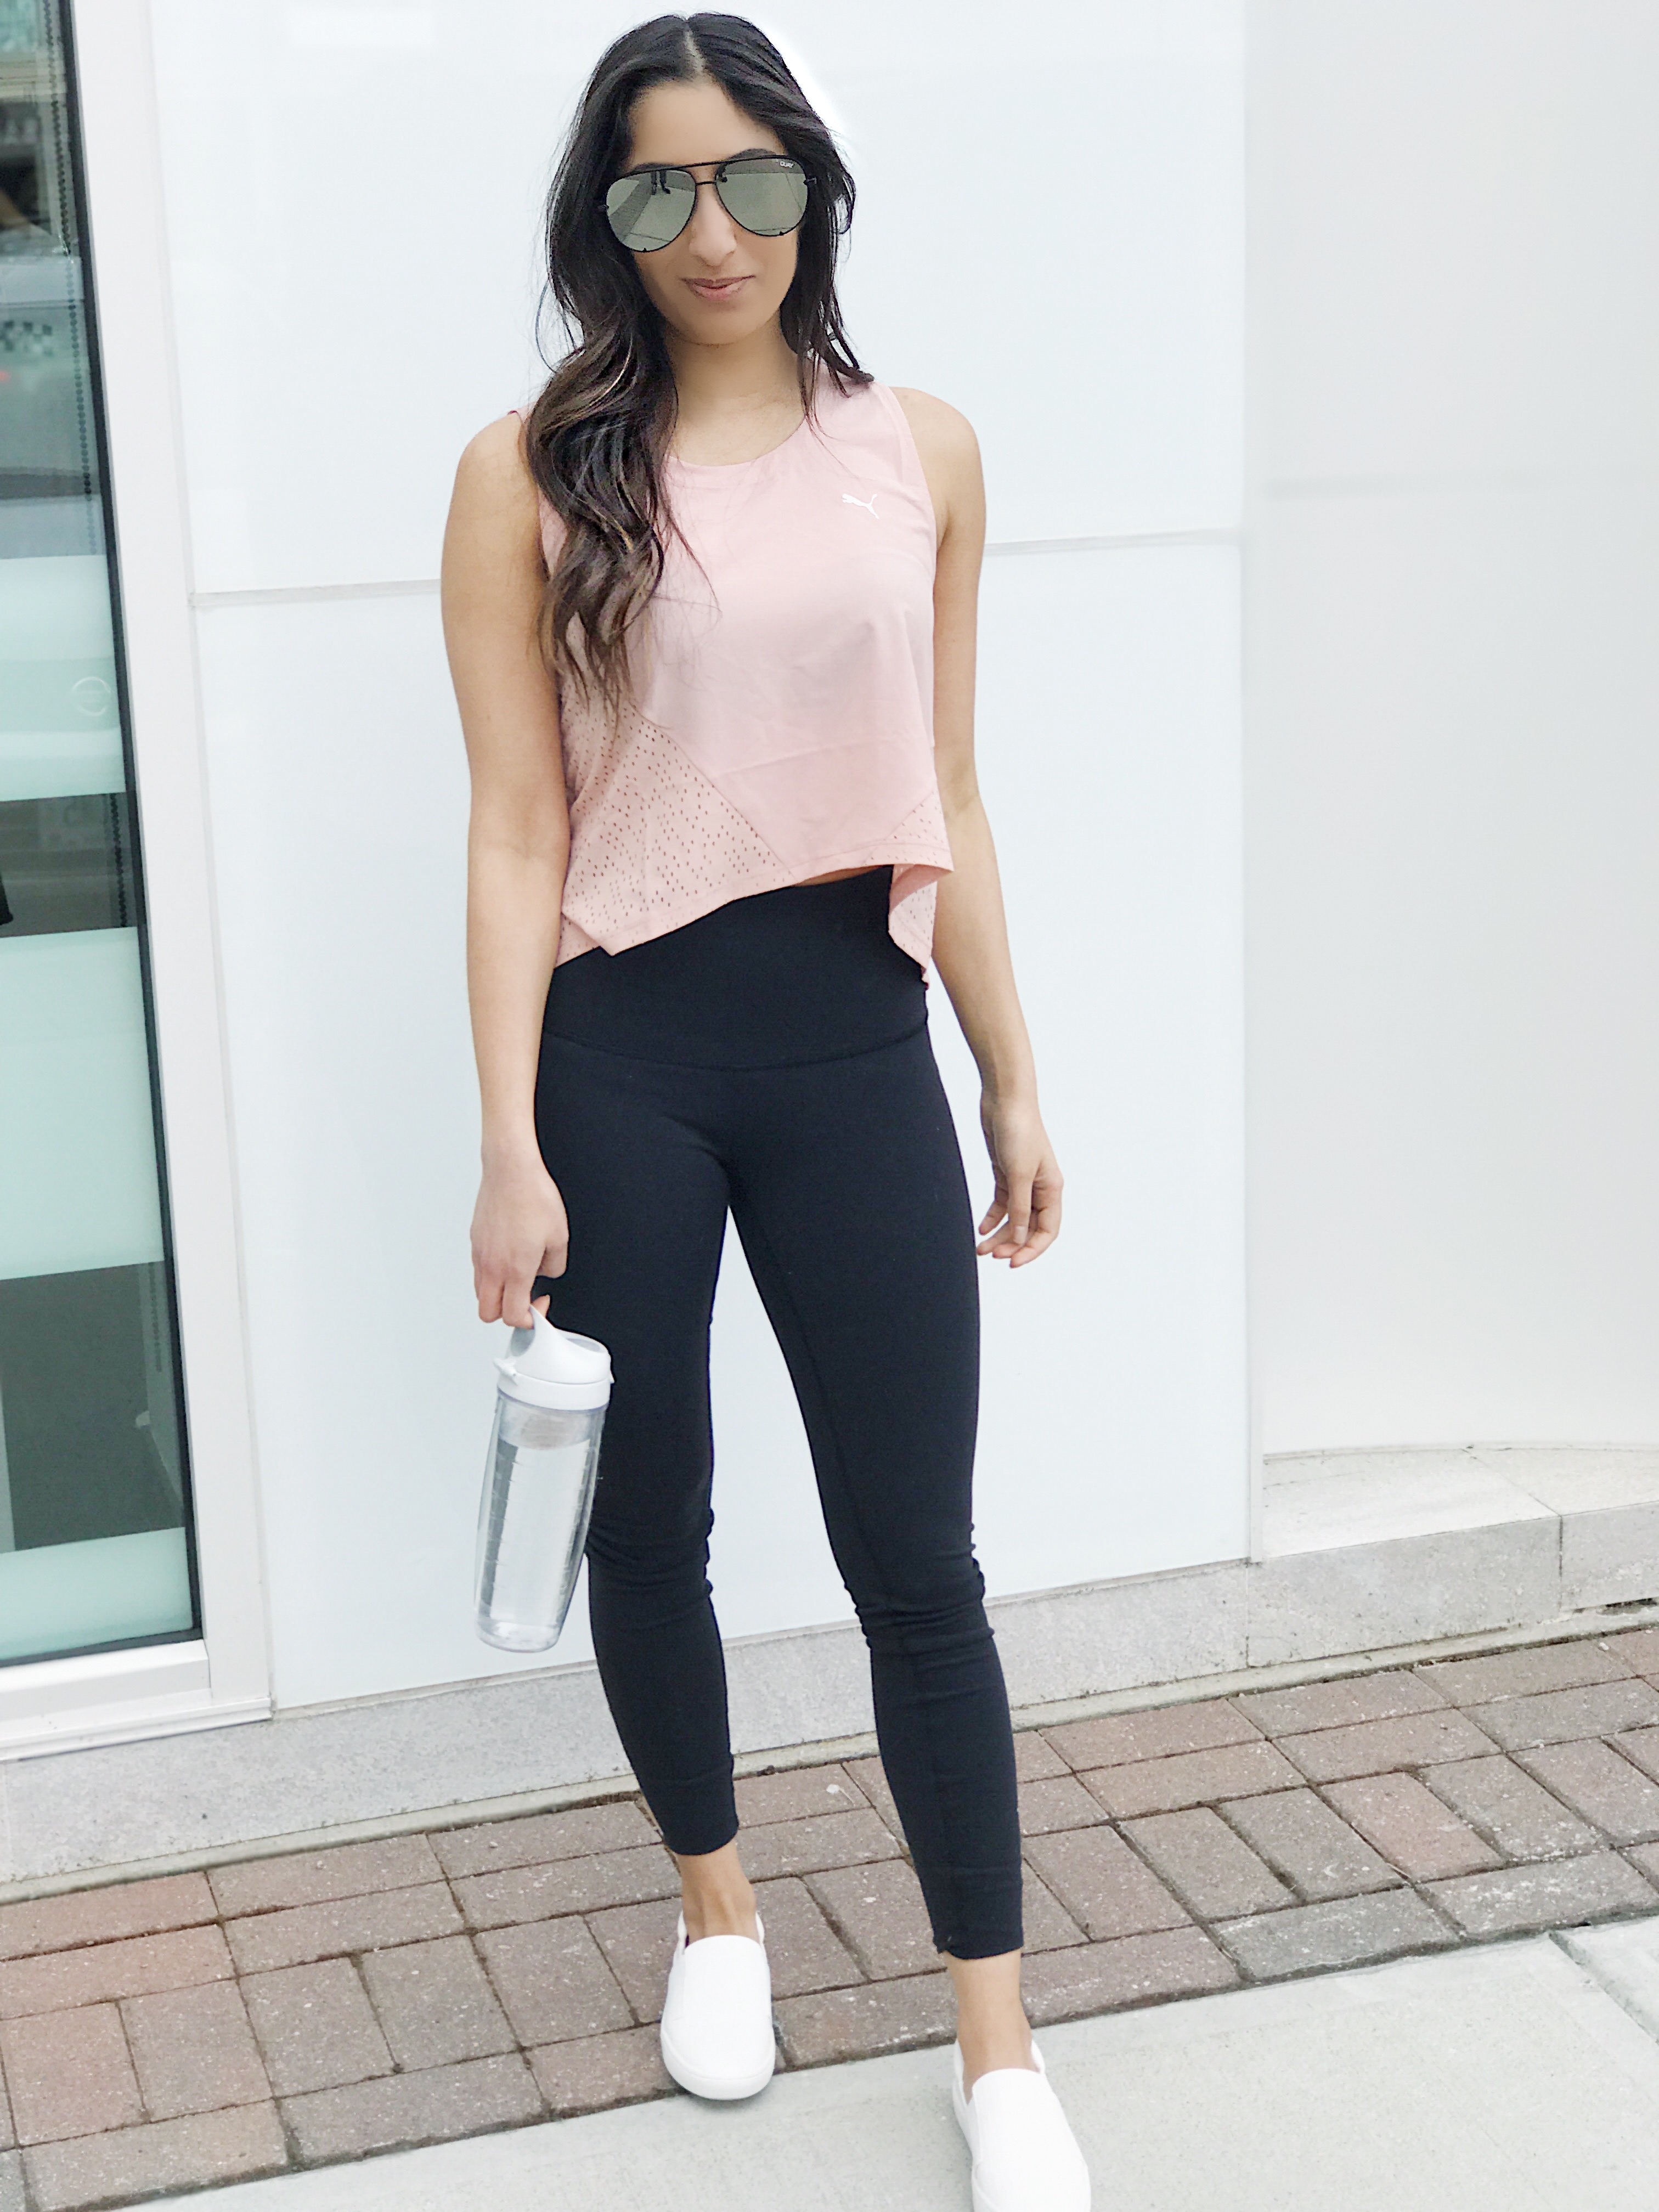 Cute Workout Clothes (Crop Top + Leggings) - Olive & Rose